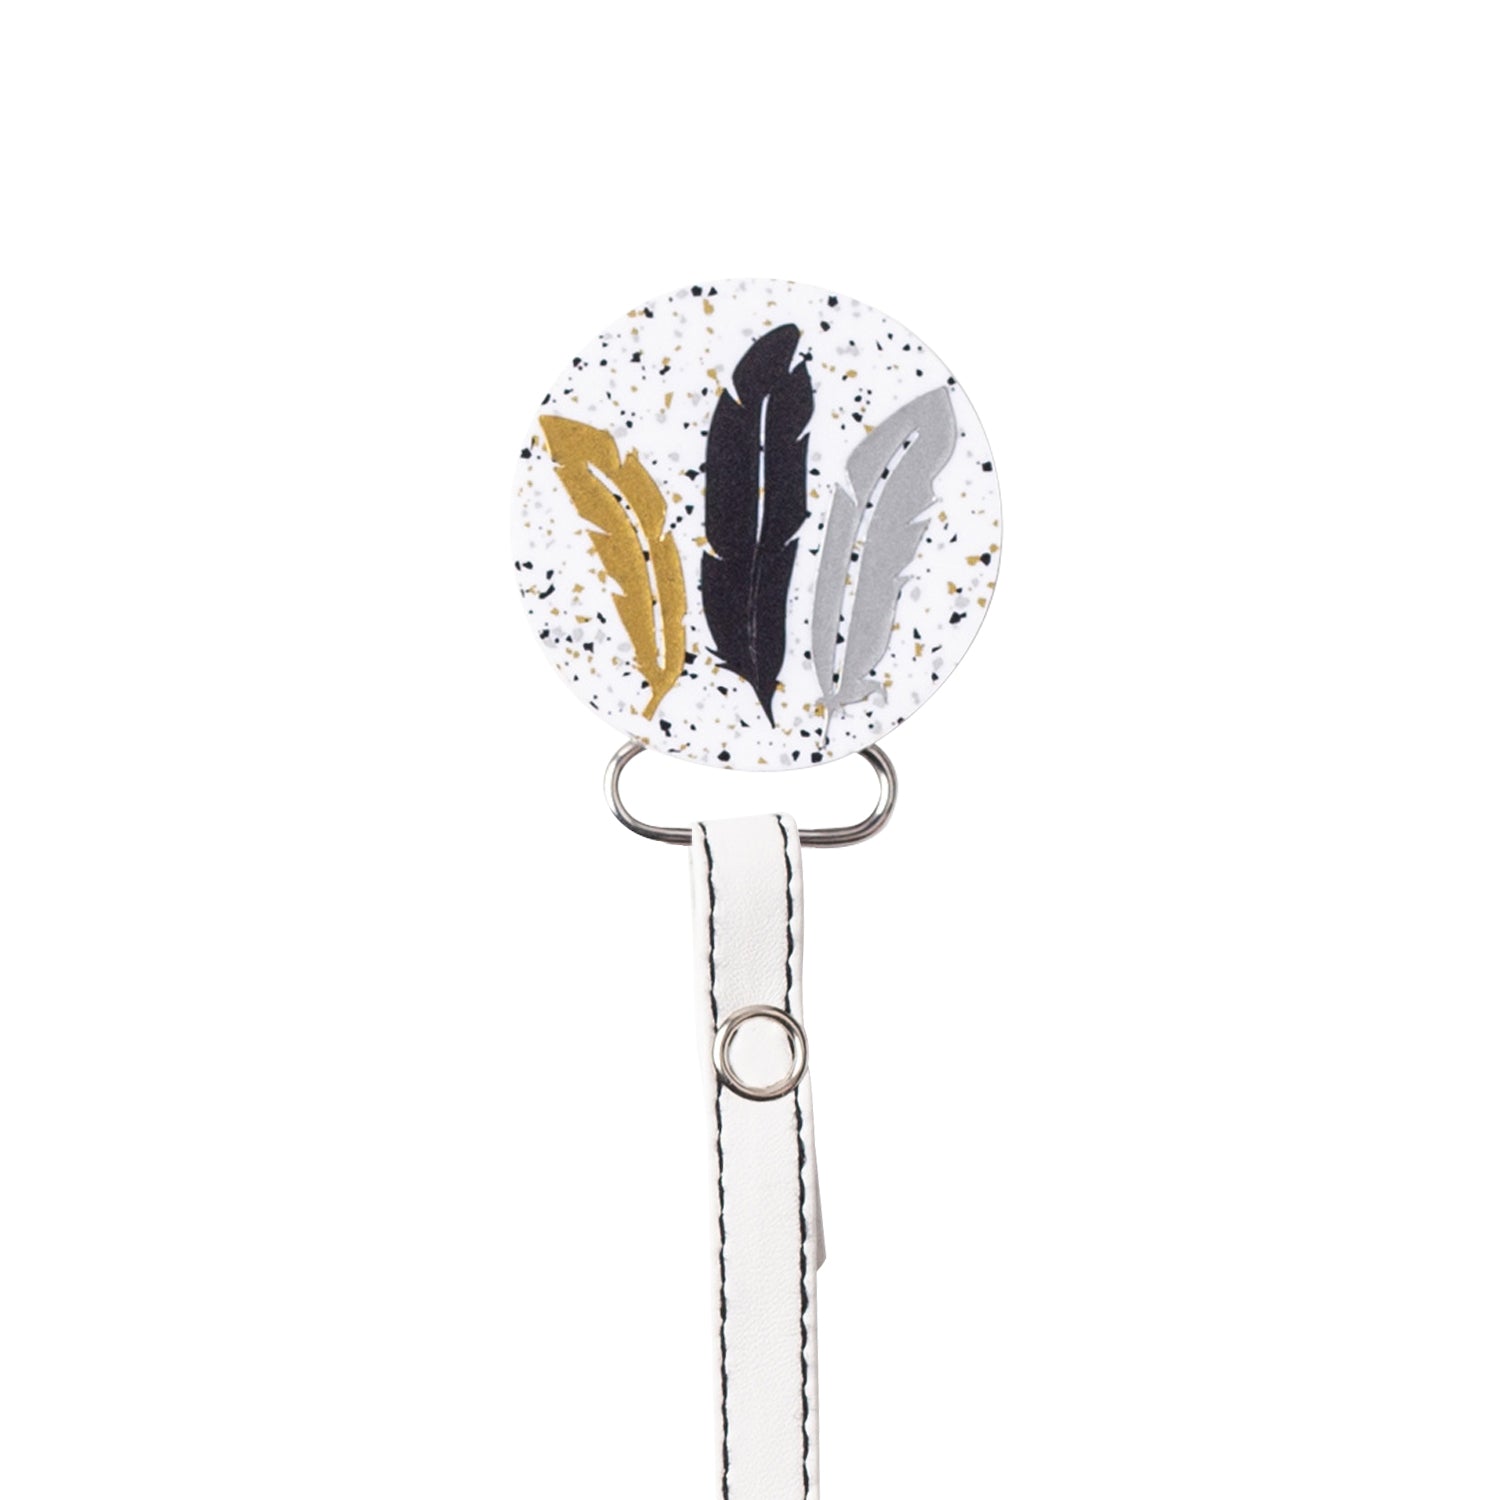 Classy Paci Tri Feather metallic, white, gold, silver black baby girl boy pacifier clip Friggs Bibs Gift Set